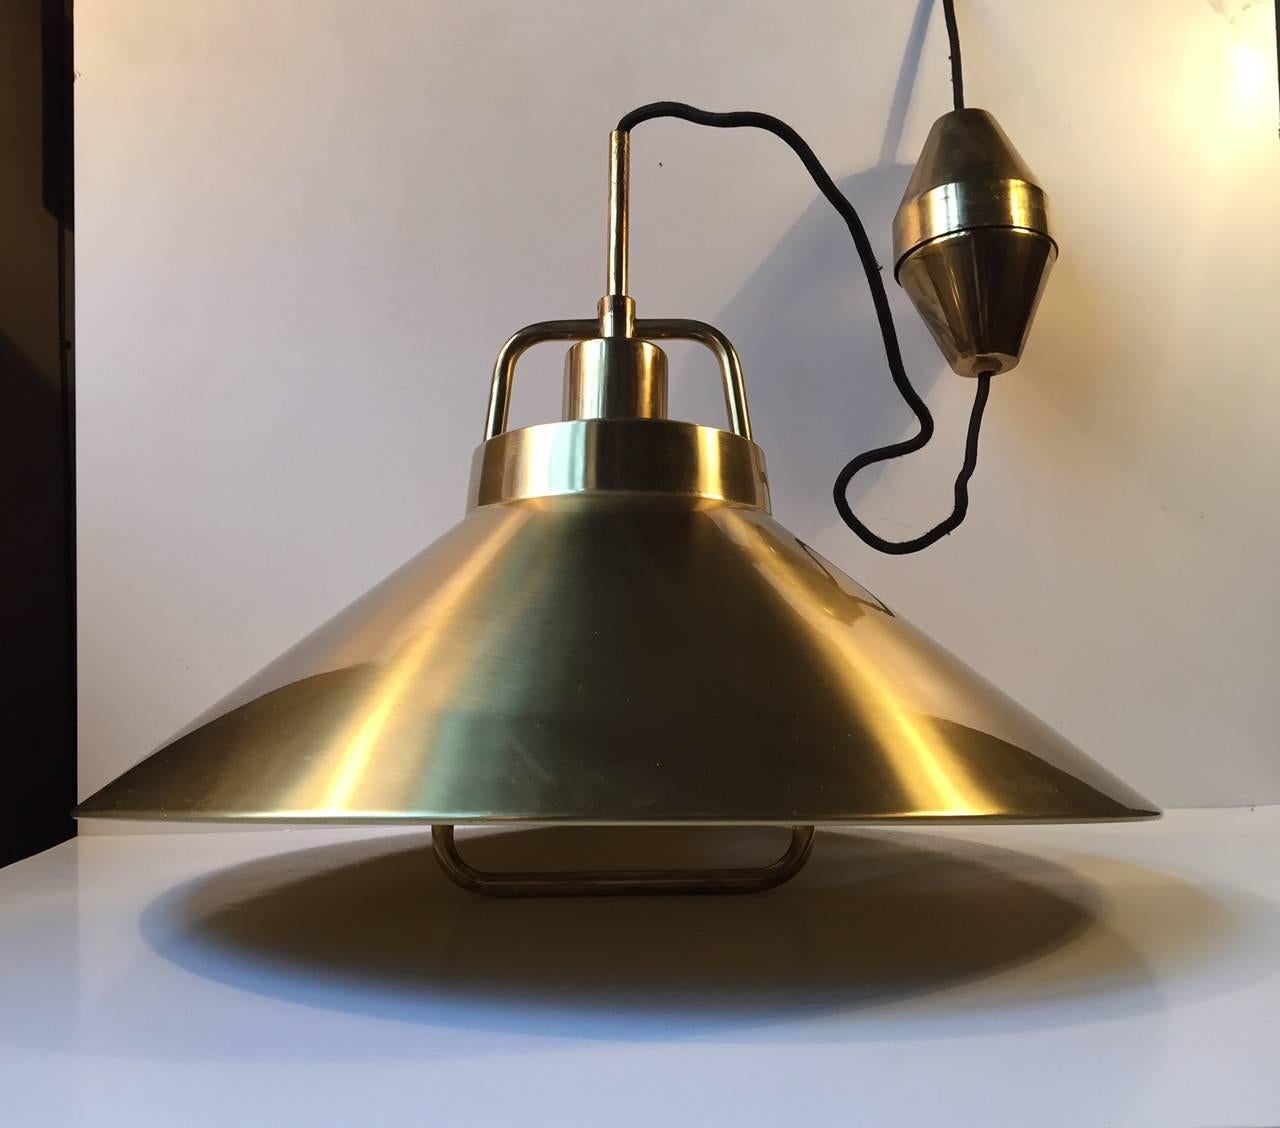 - Solid brass pendant light designed by Fritz Schlegel
- Manufactured by Lyfa in Denmark in the mid-1960s.
- Brass mounting bracket with adjustable height and original matching brass canopy
- Model P 295.